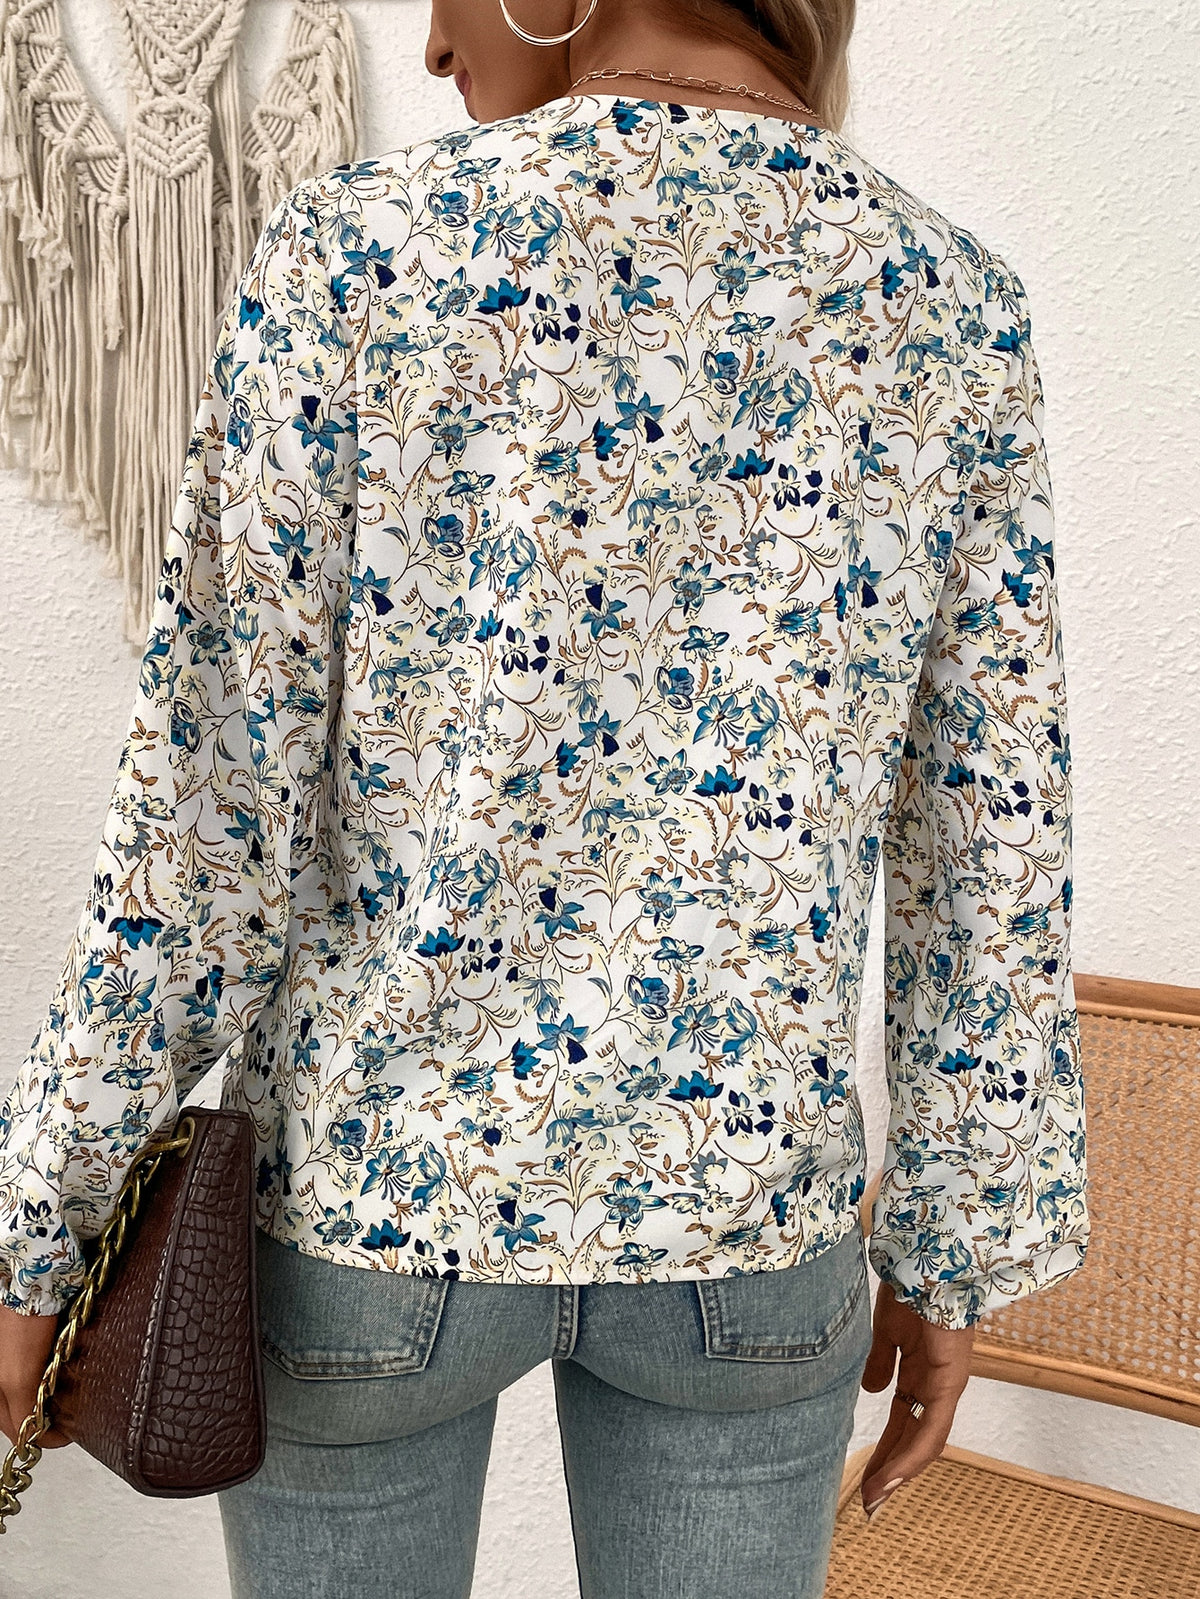 Floral Print Lantern Sleeve Blouse with Lace Insert